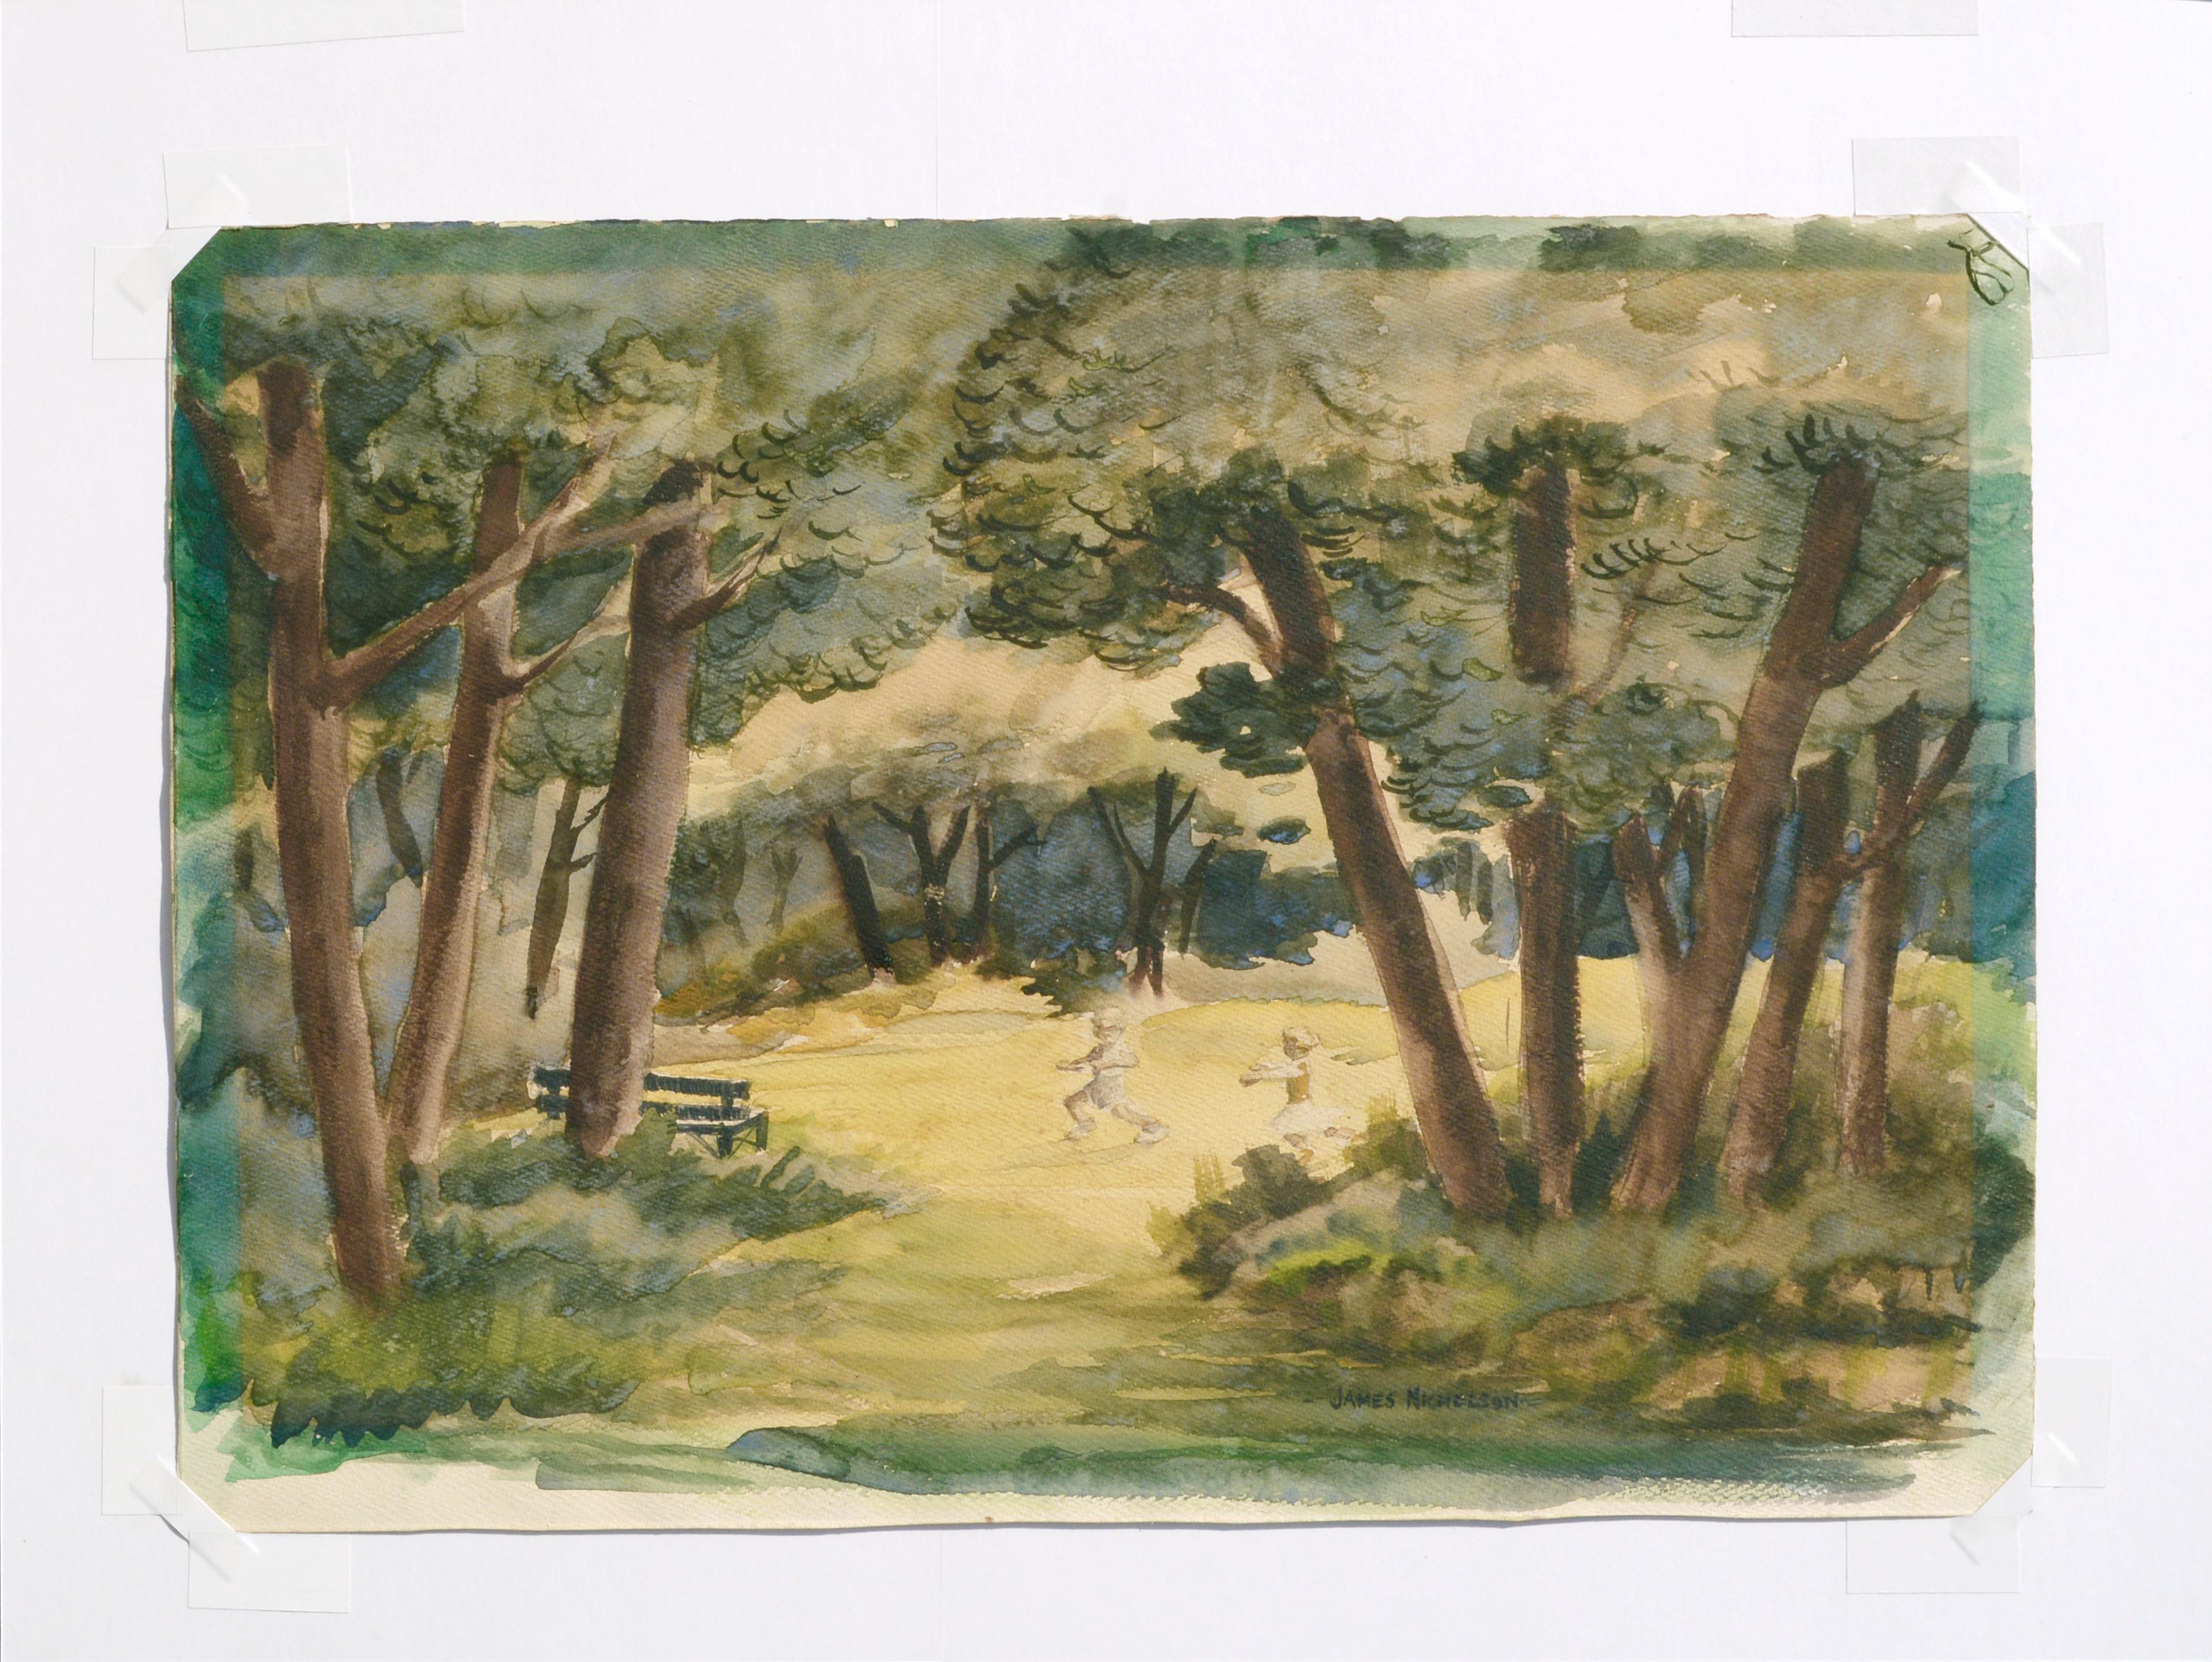 Lively landscape of a green park with figures of children playing by James Nicholson (American, 20th Century). Signed 